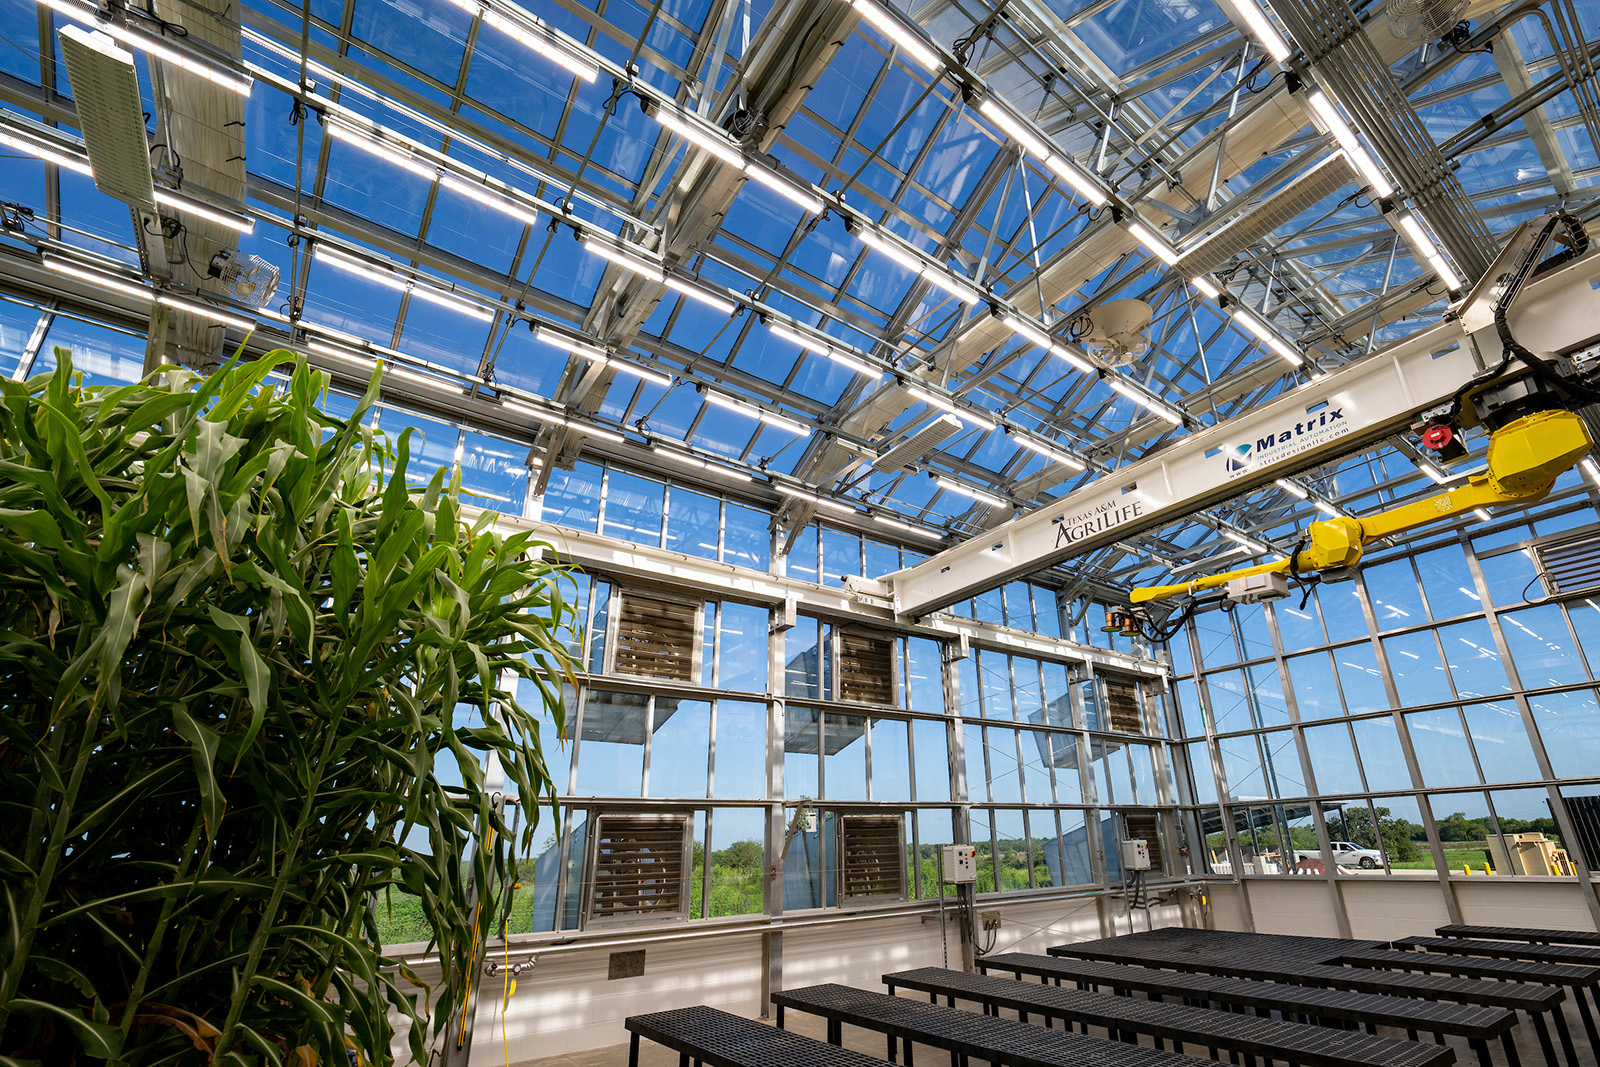 Interior wide shot of glass greenhouse with robotic arm attached to ceiling and corn plants in a corner